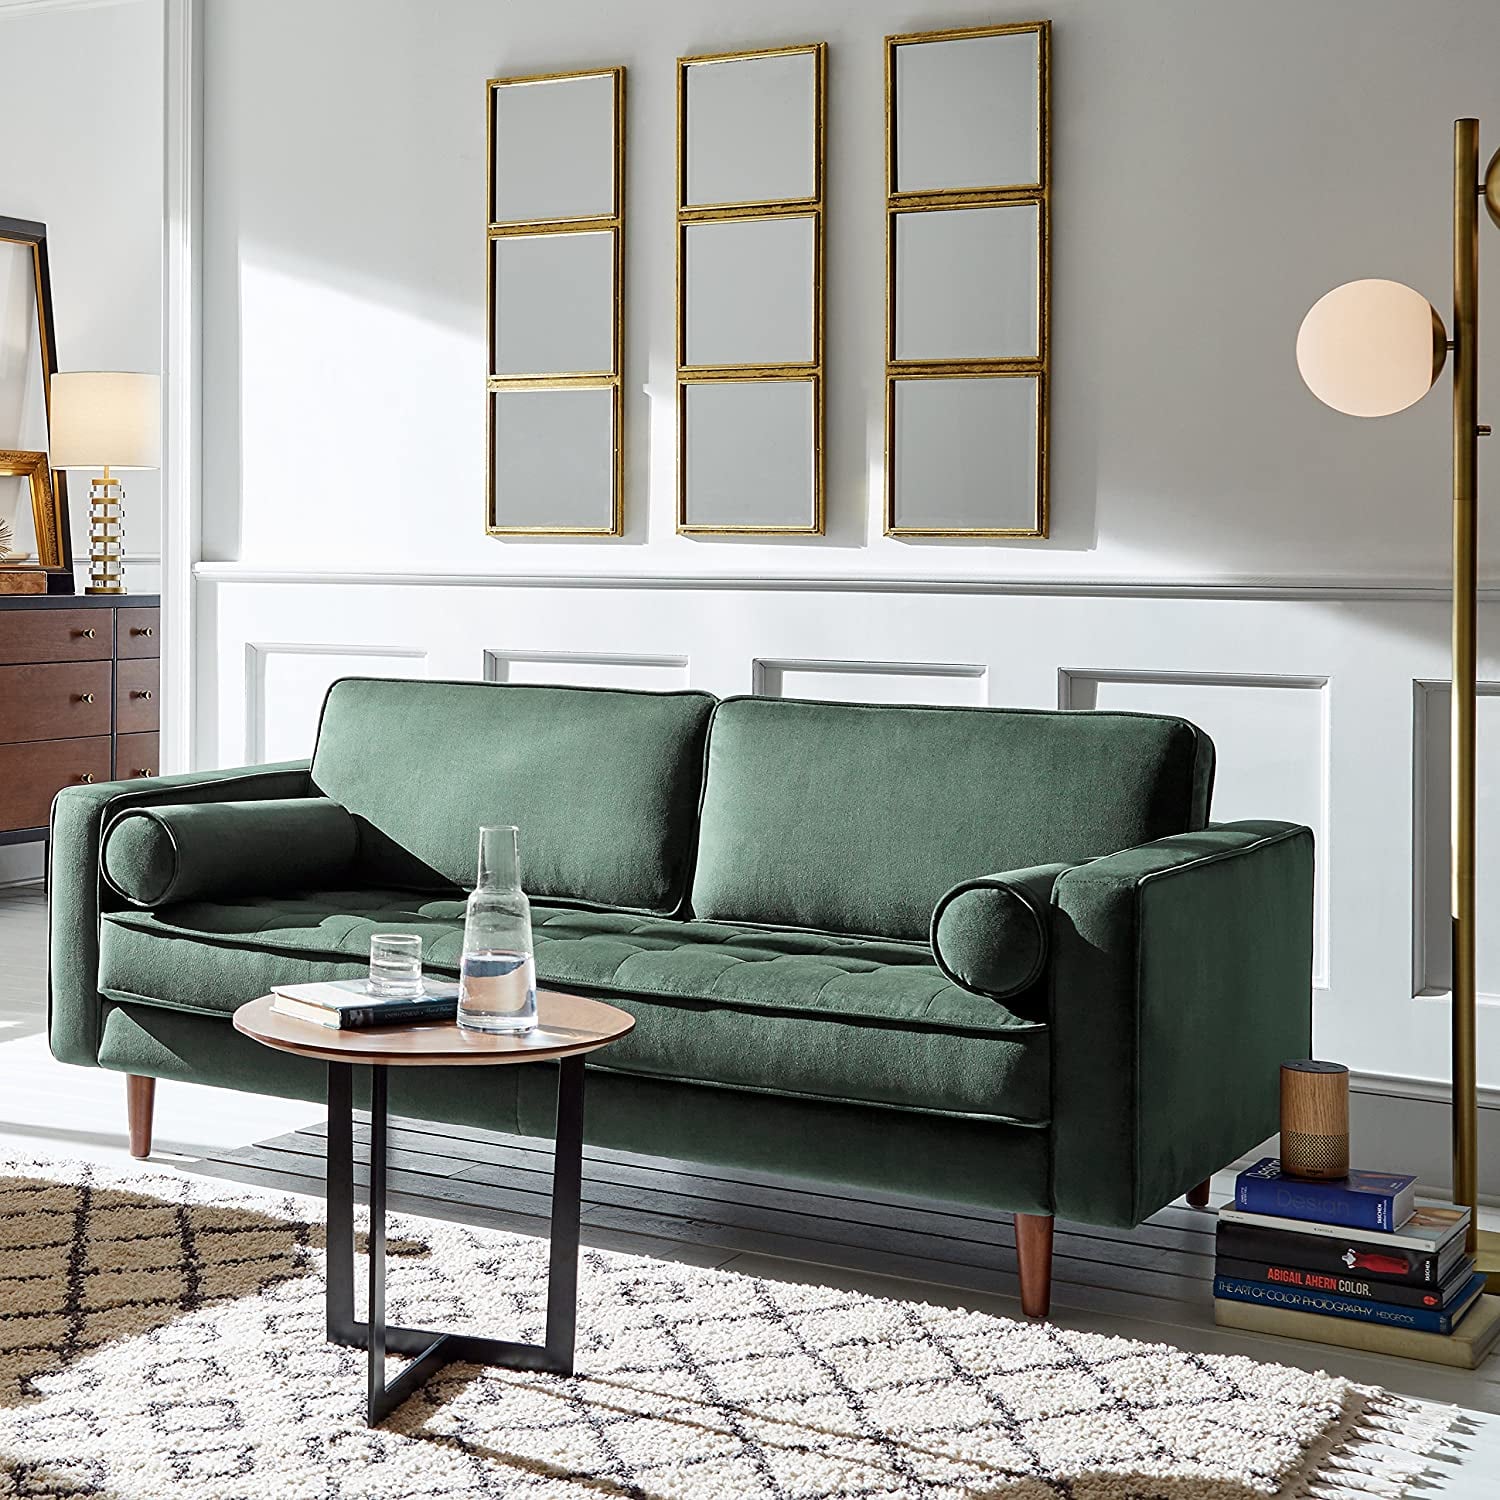 Best Couches From Amazon 2022 | POPSUGAR Home